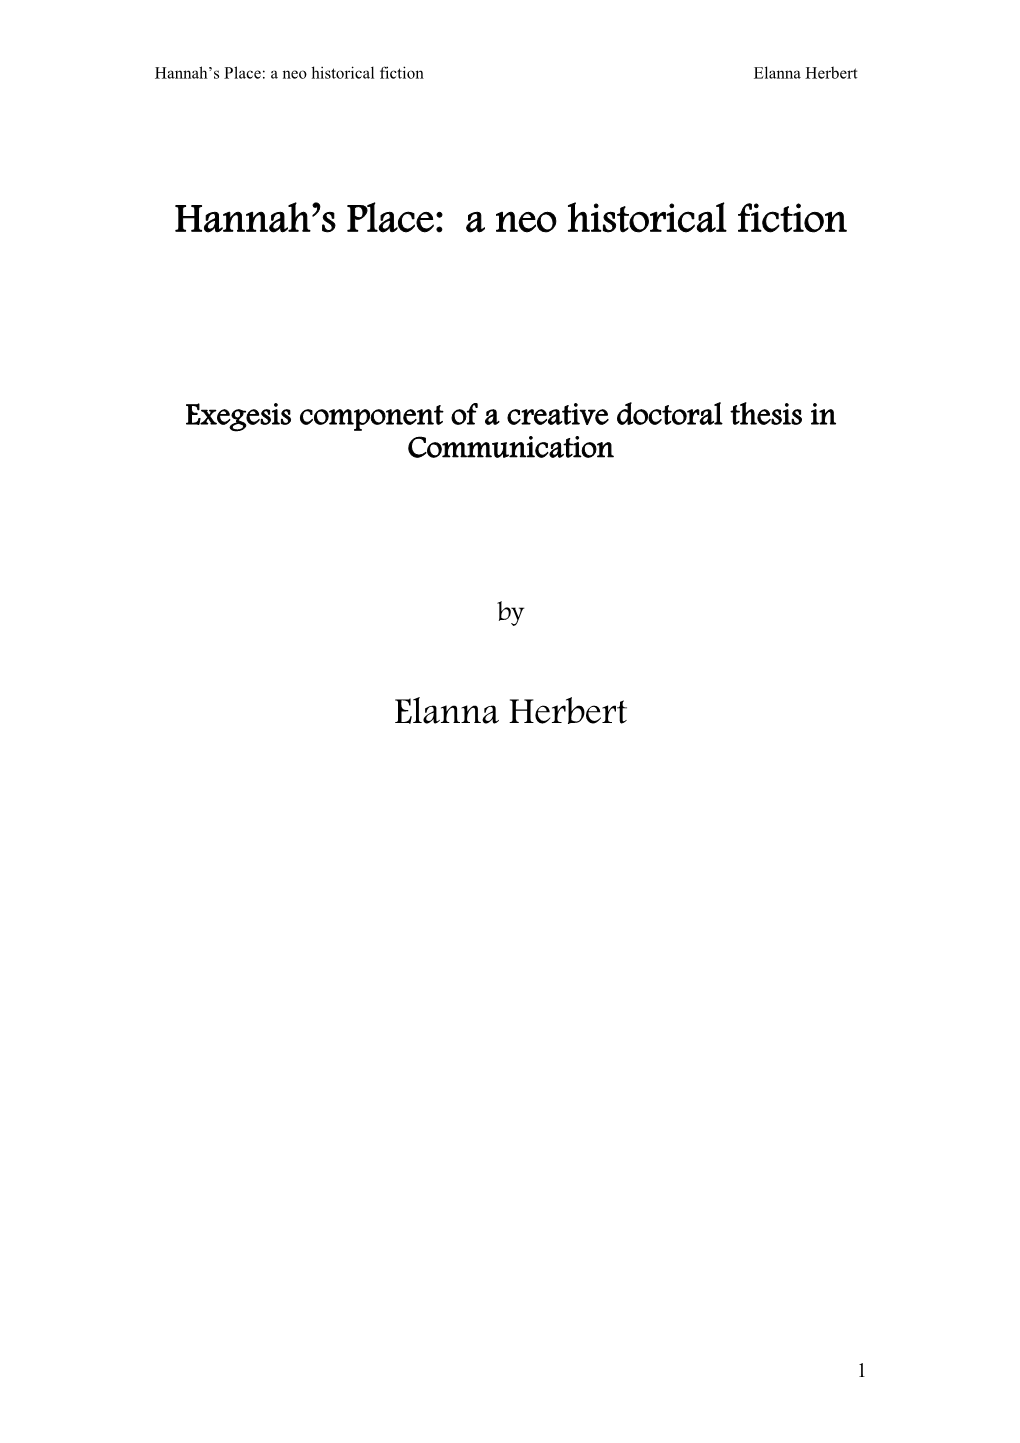 Hannah's Place: a Neo Historical Fiction